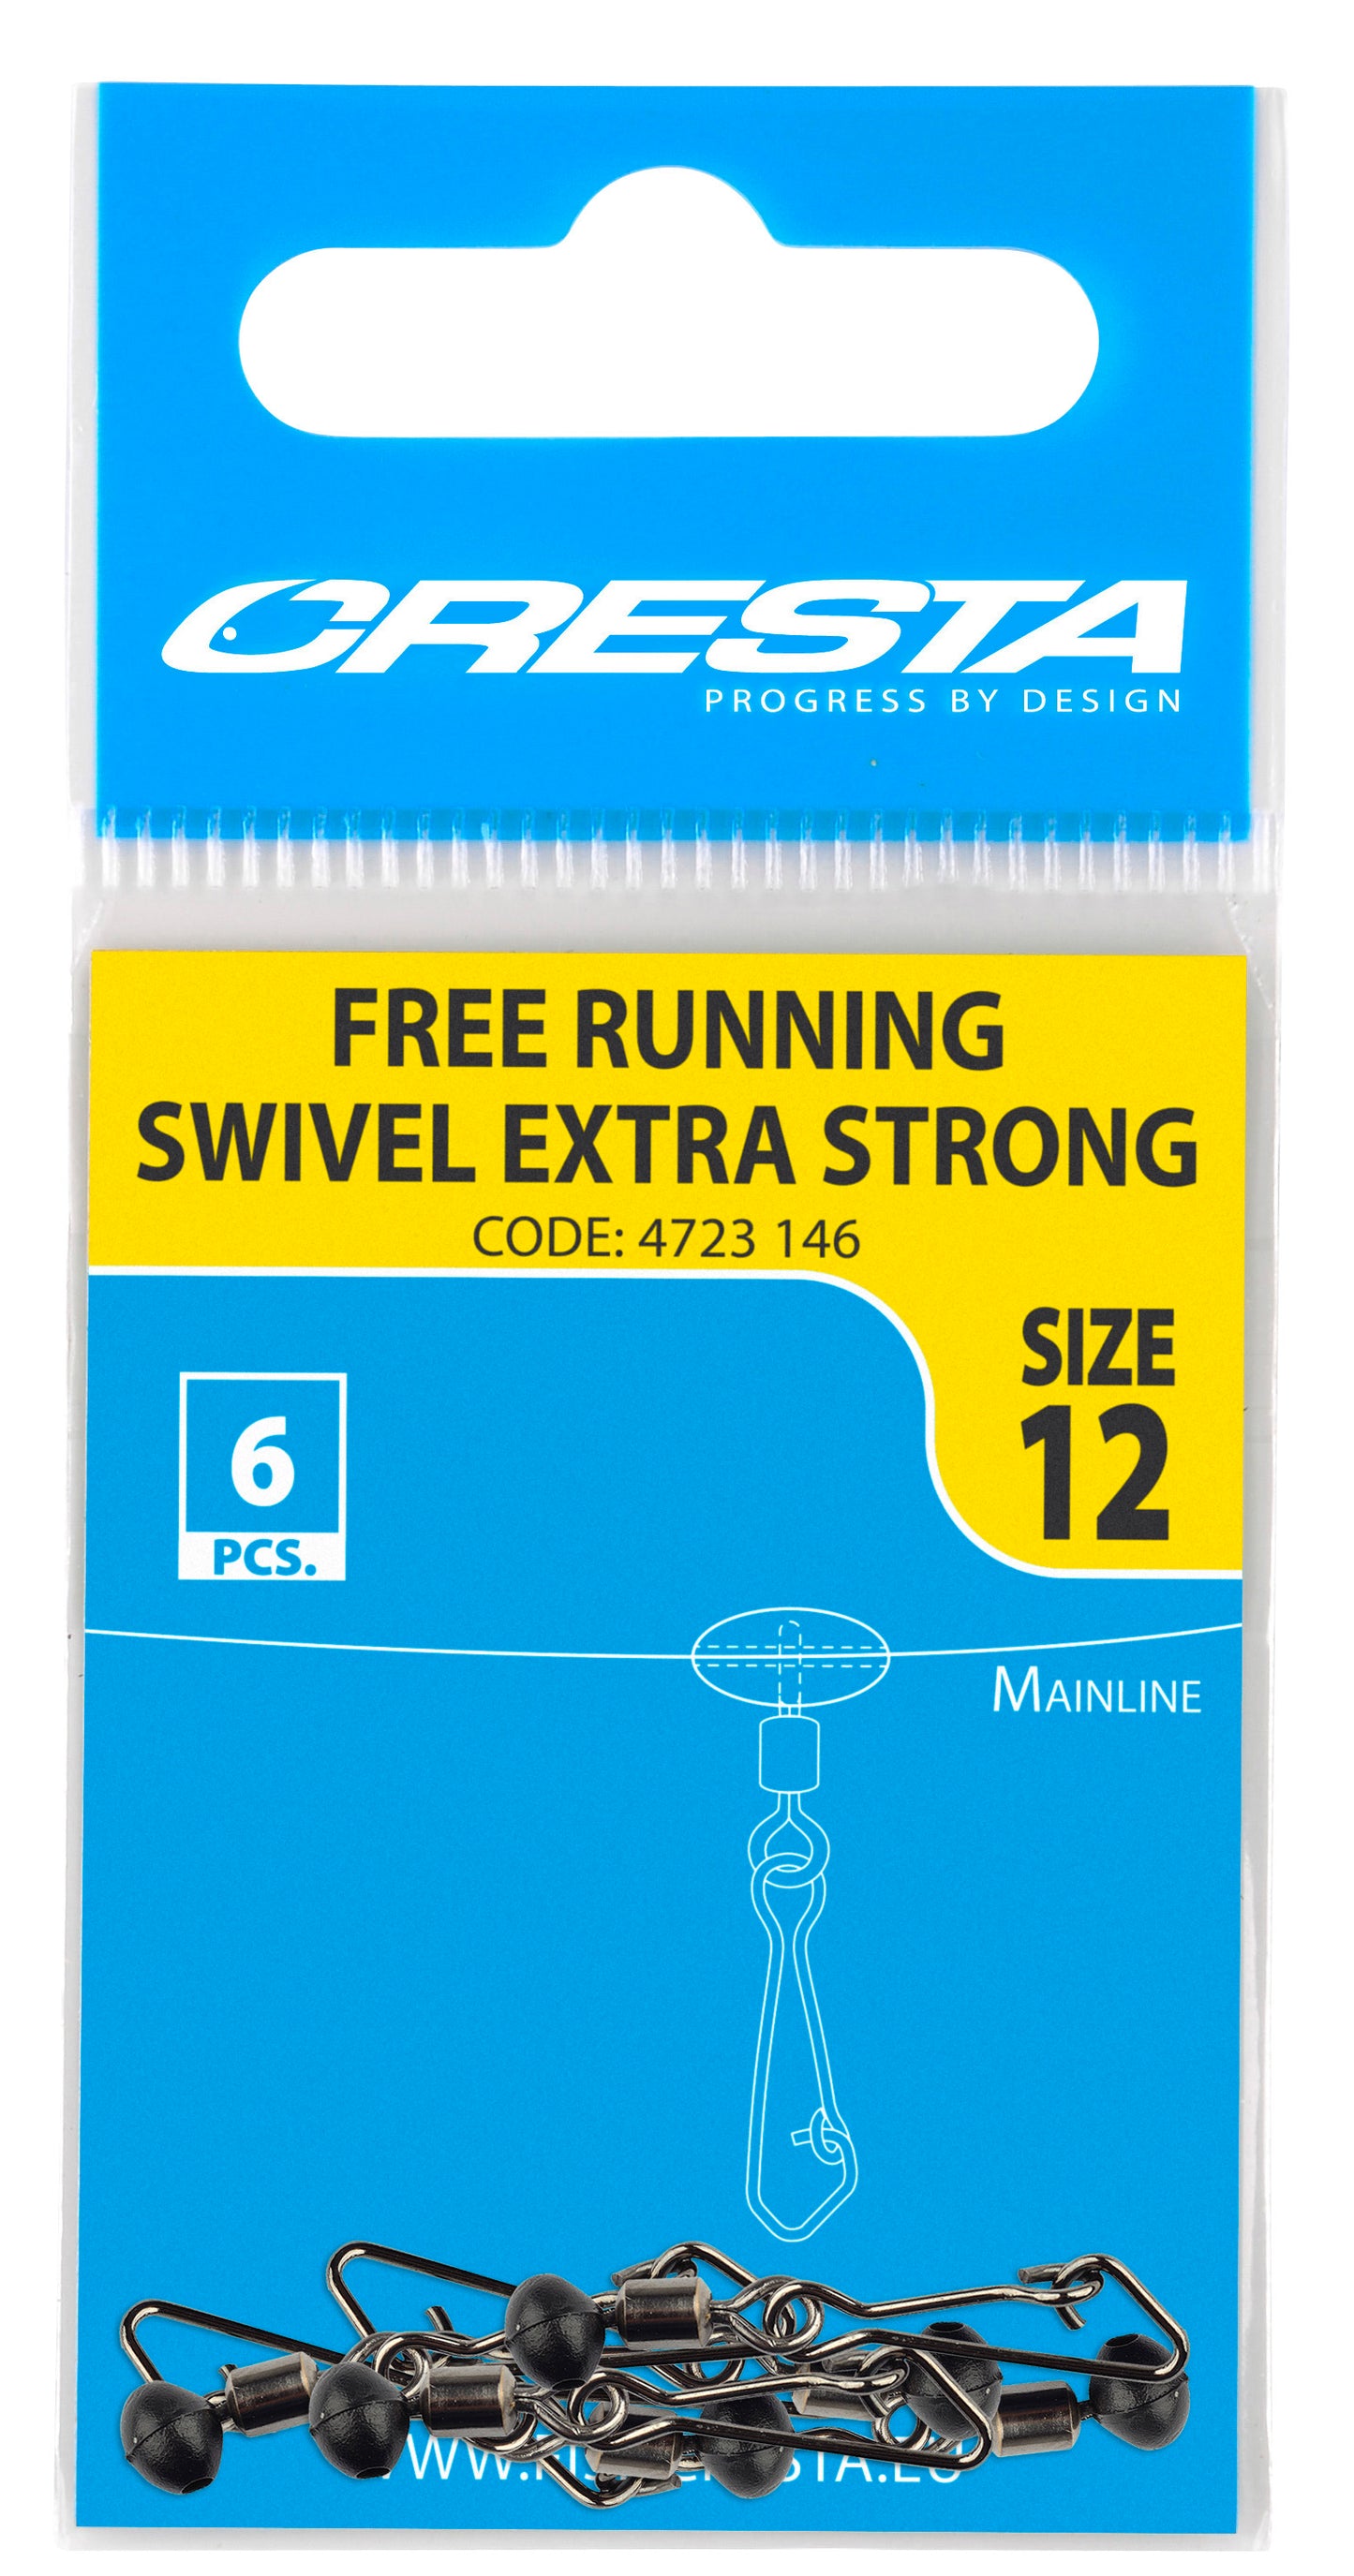 FREE RUNNING SWIVEL EXTRA STRONG - KM-Tackle